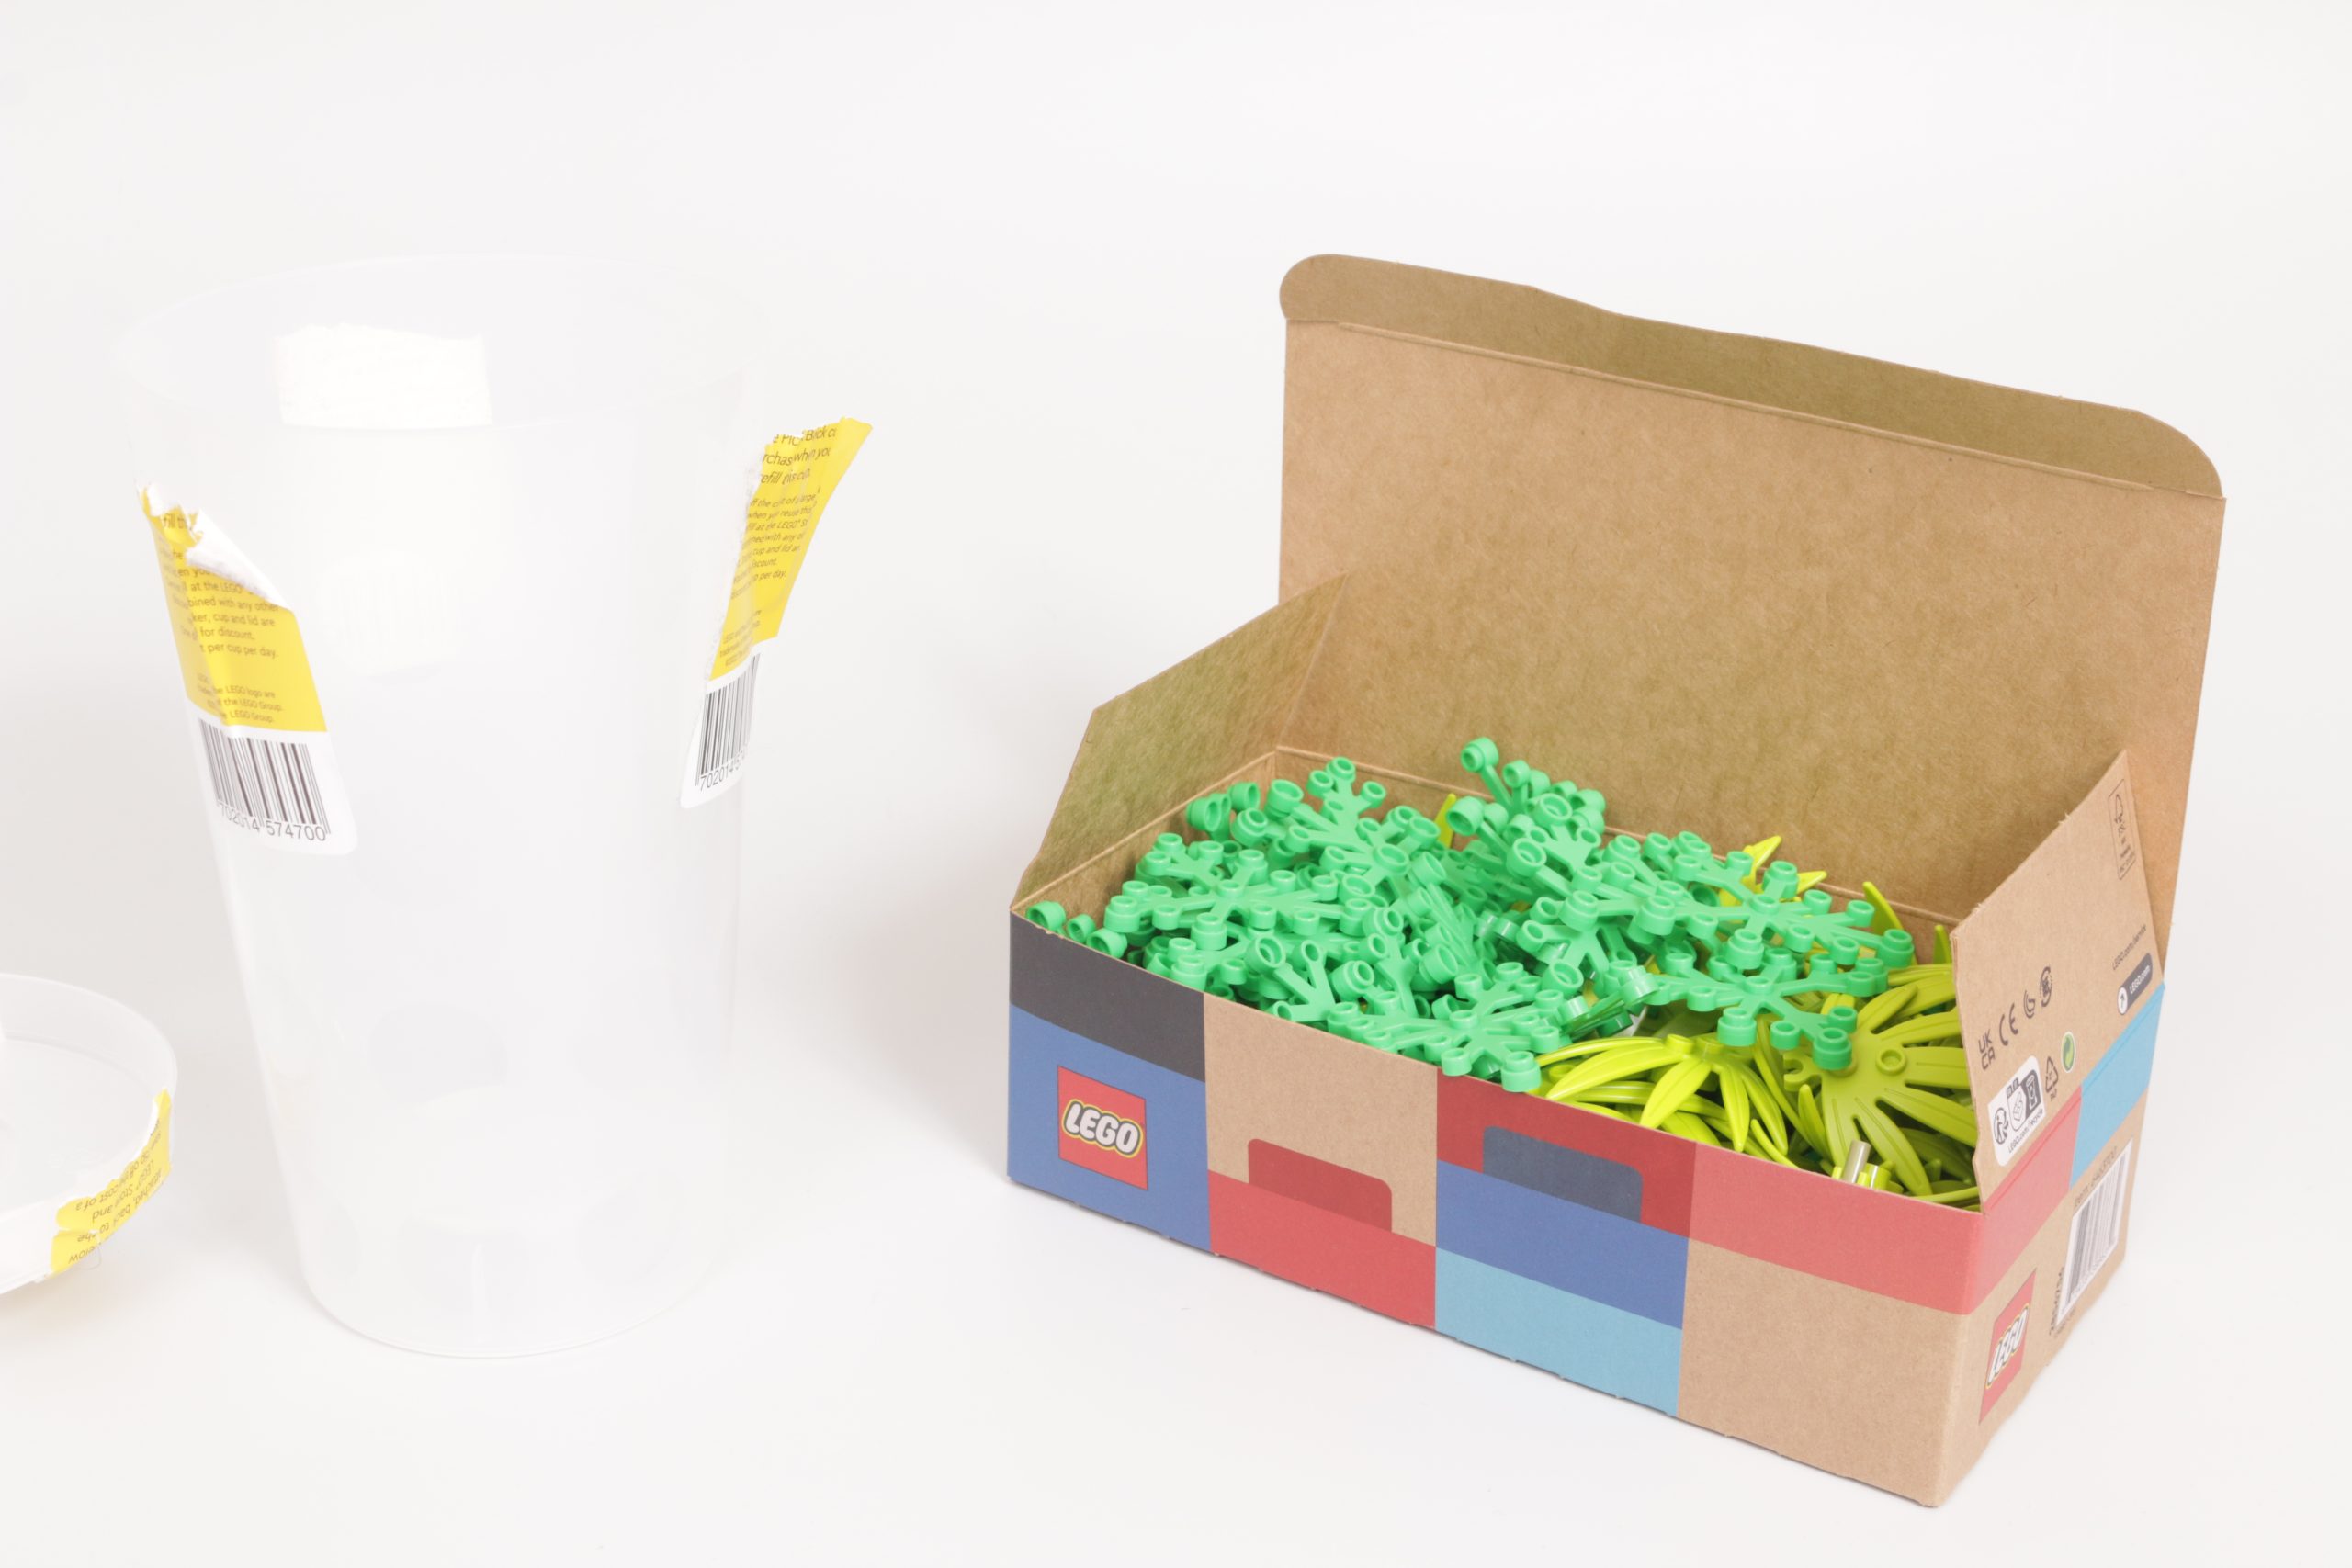 Closer look at LEGO's new Pick-a-Brick packaging